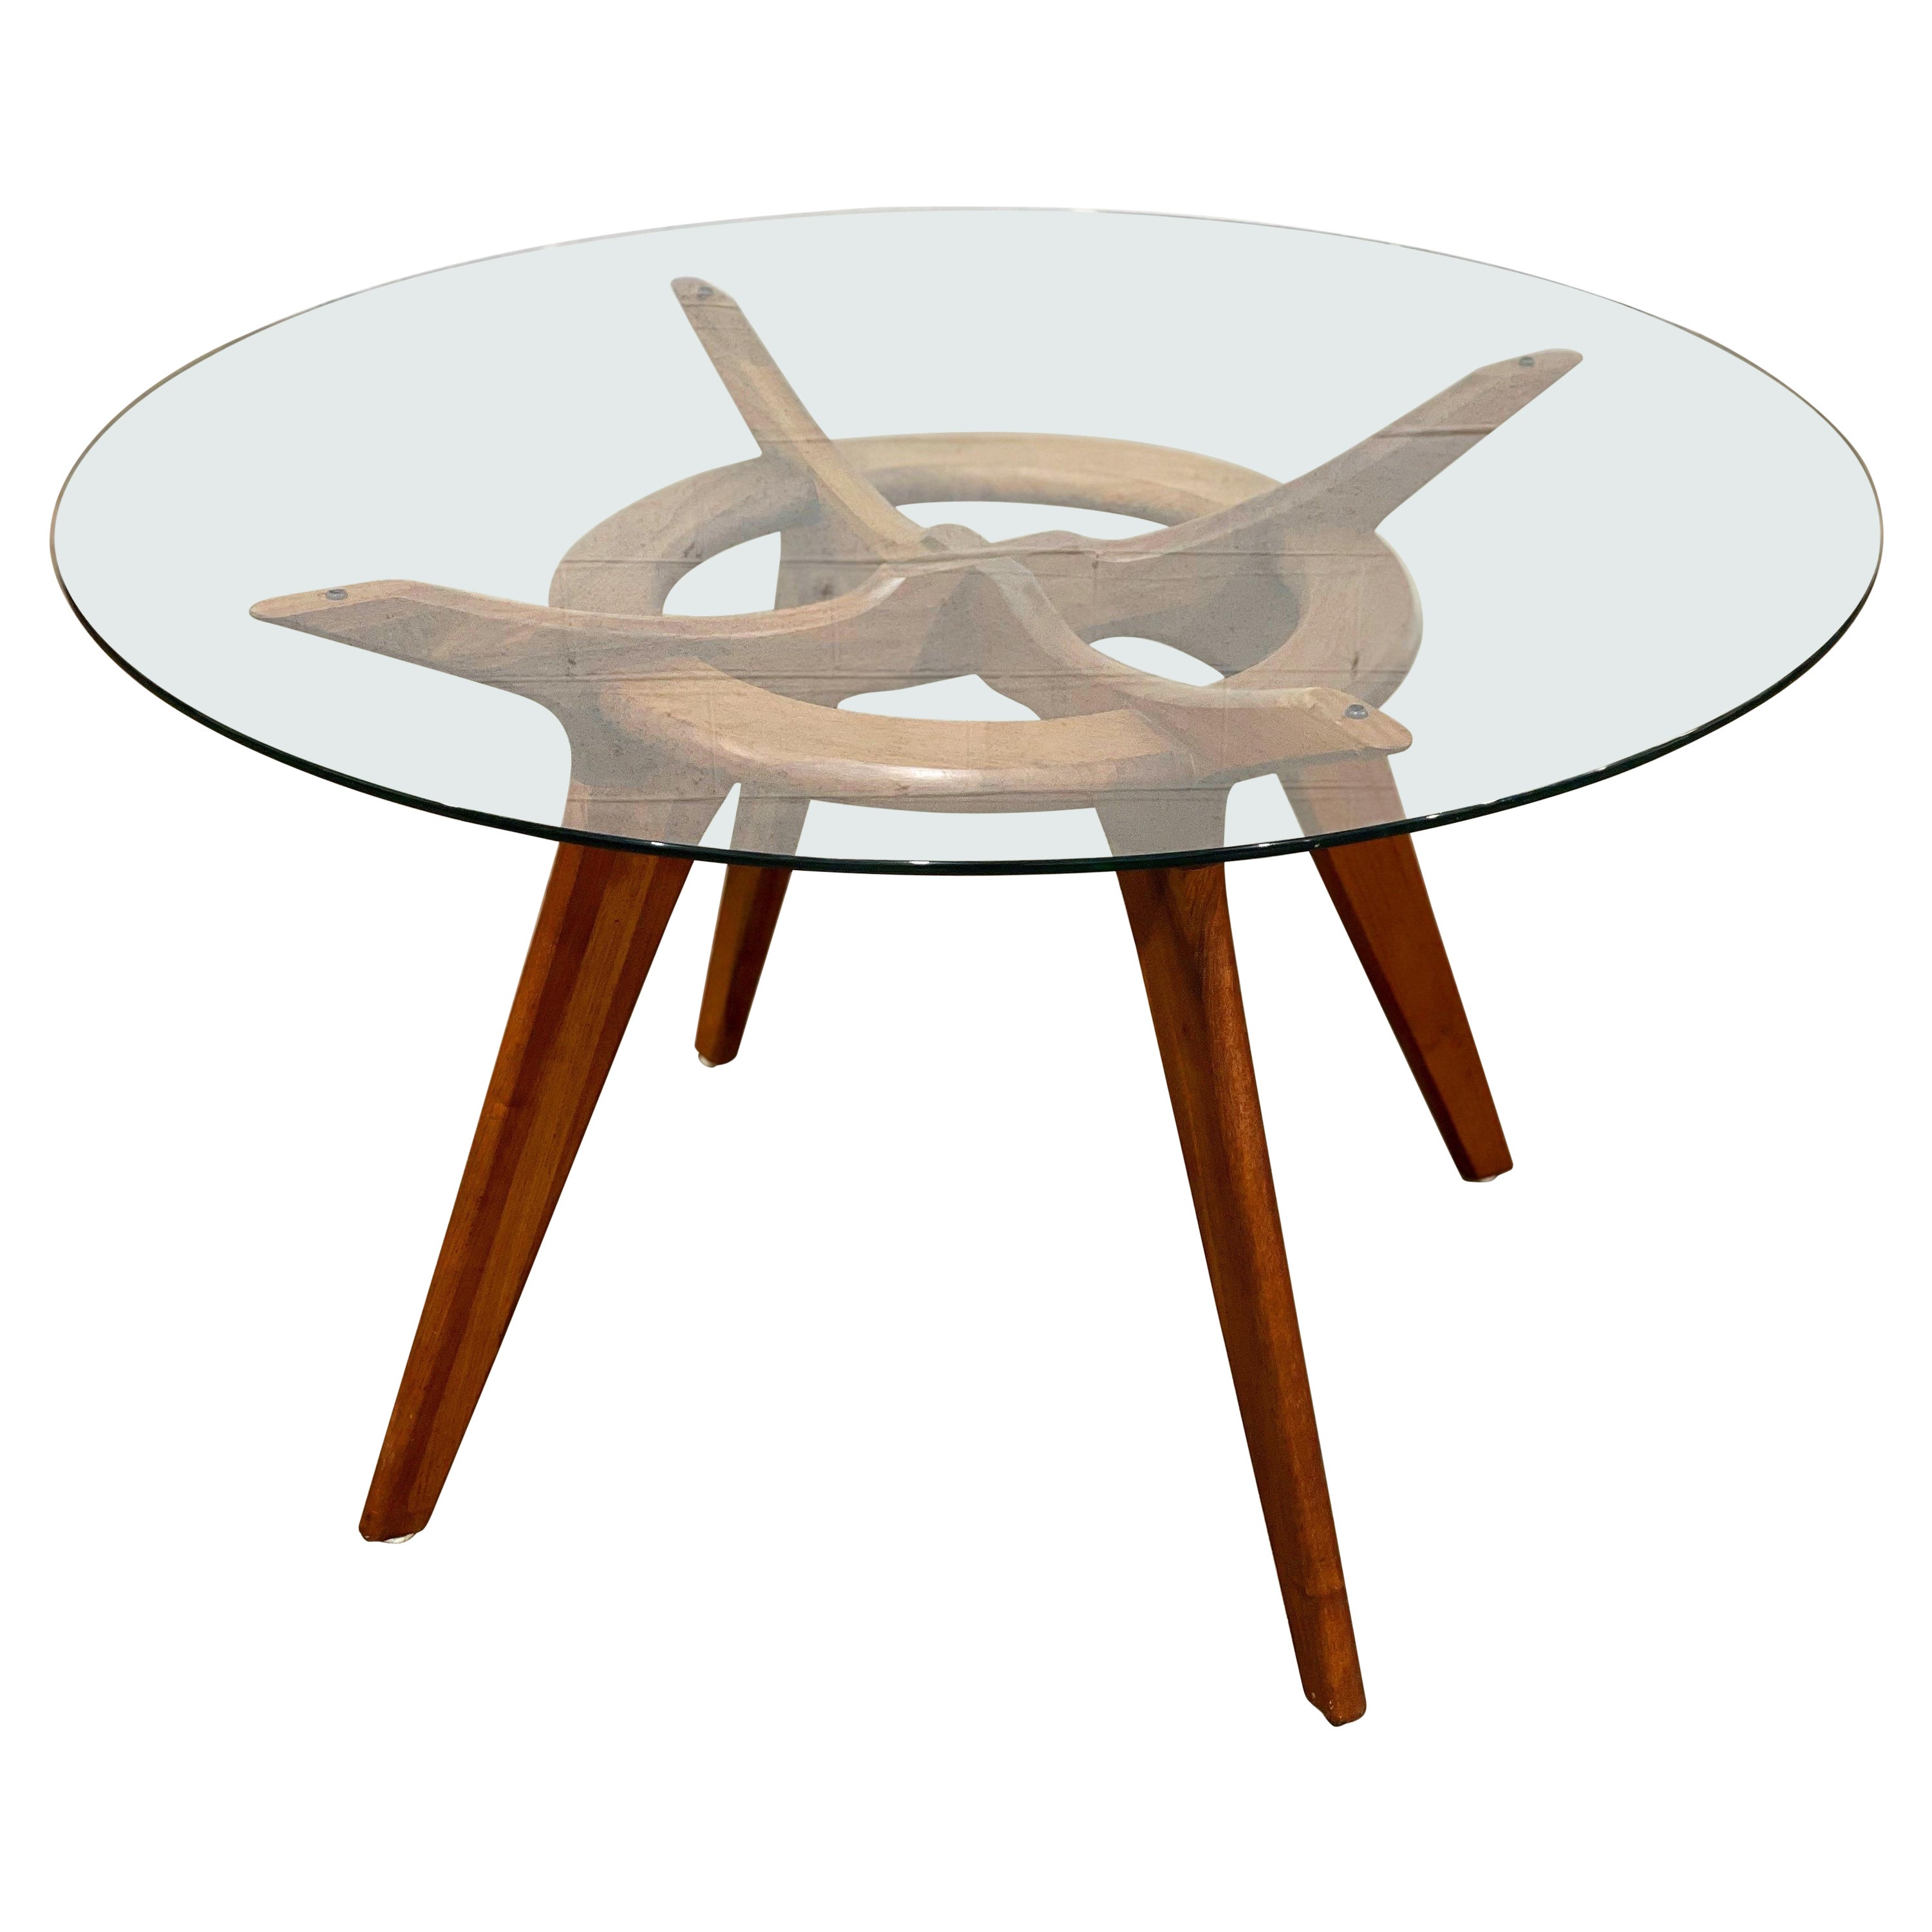 Midcentury Adrian Pearsall Compass Dining Table Model 1135 T, Walnut + Glass